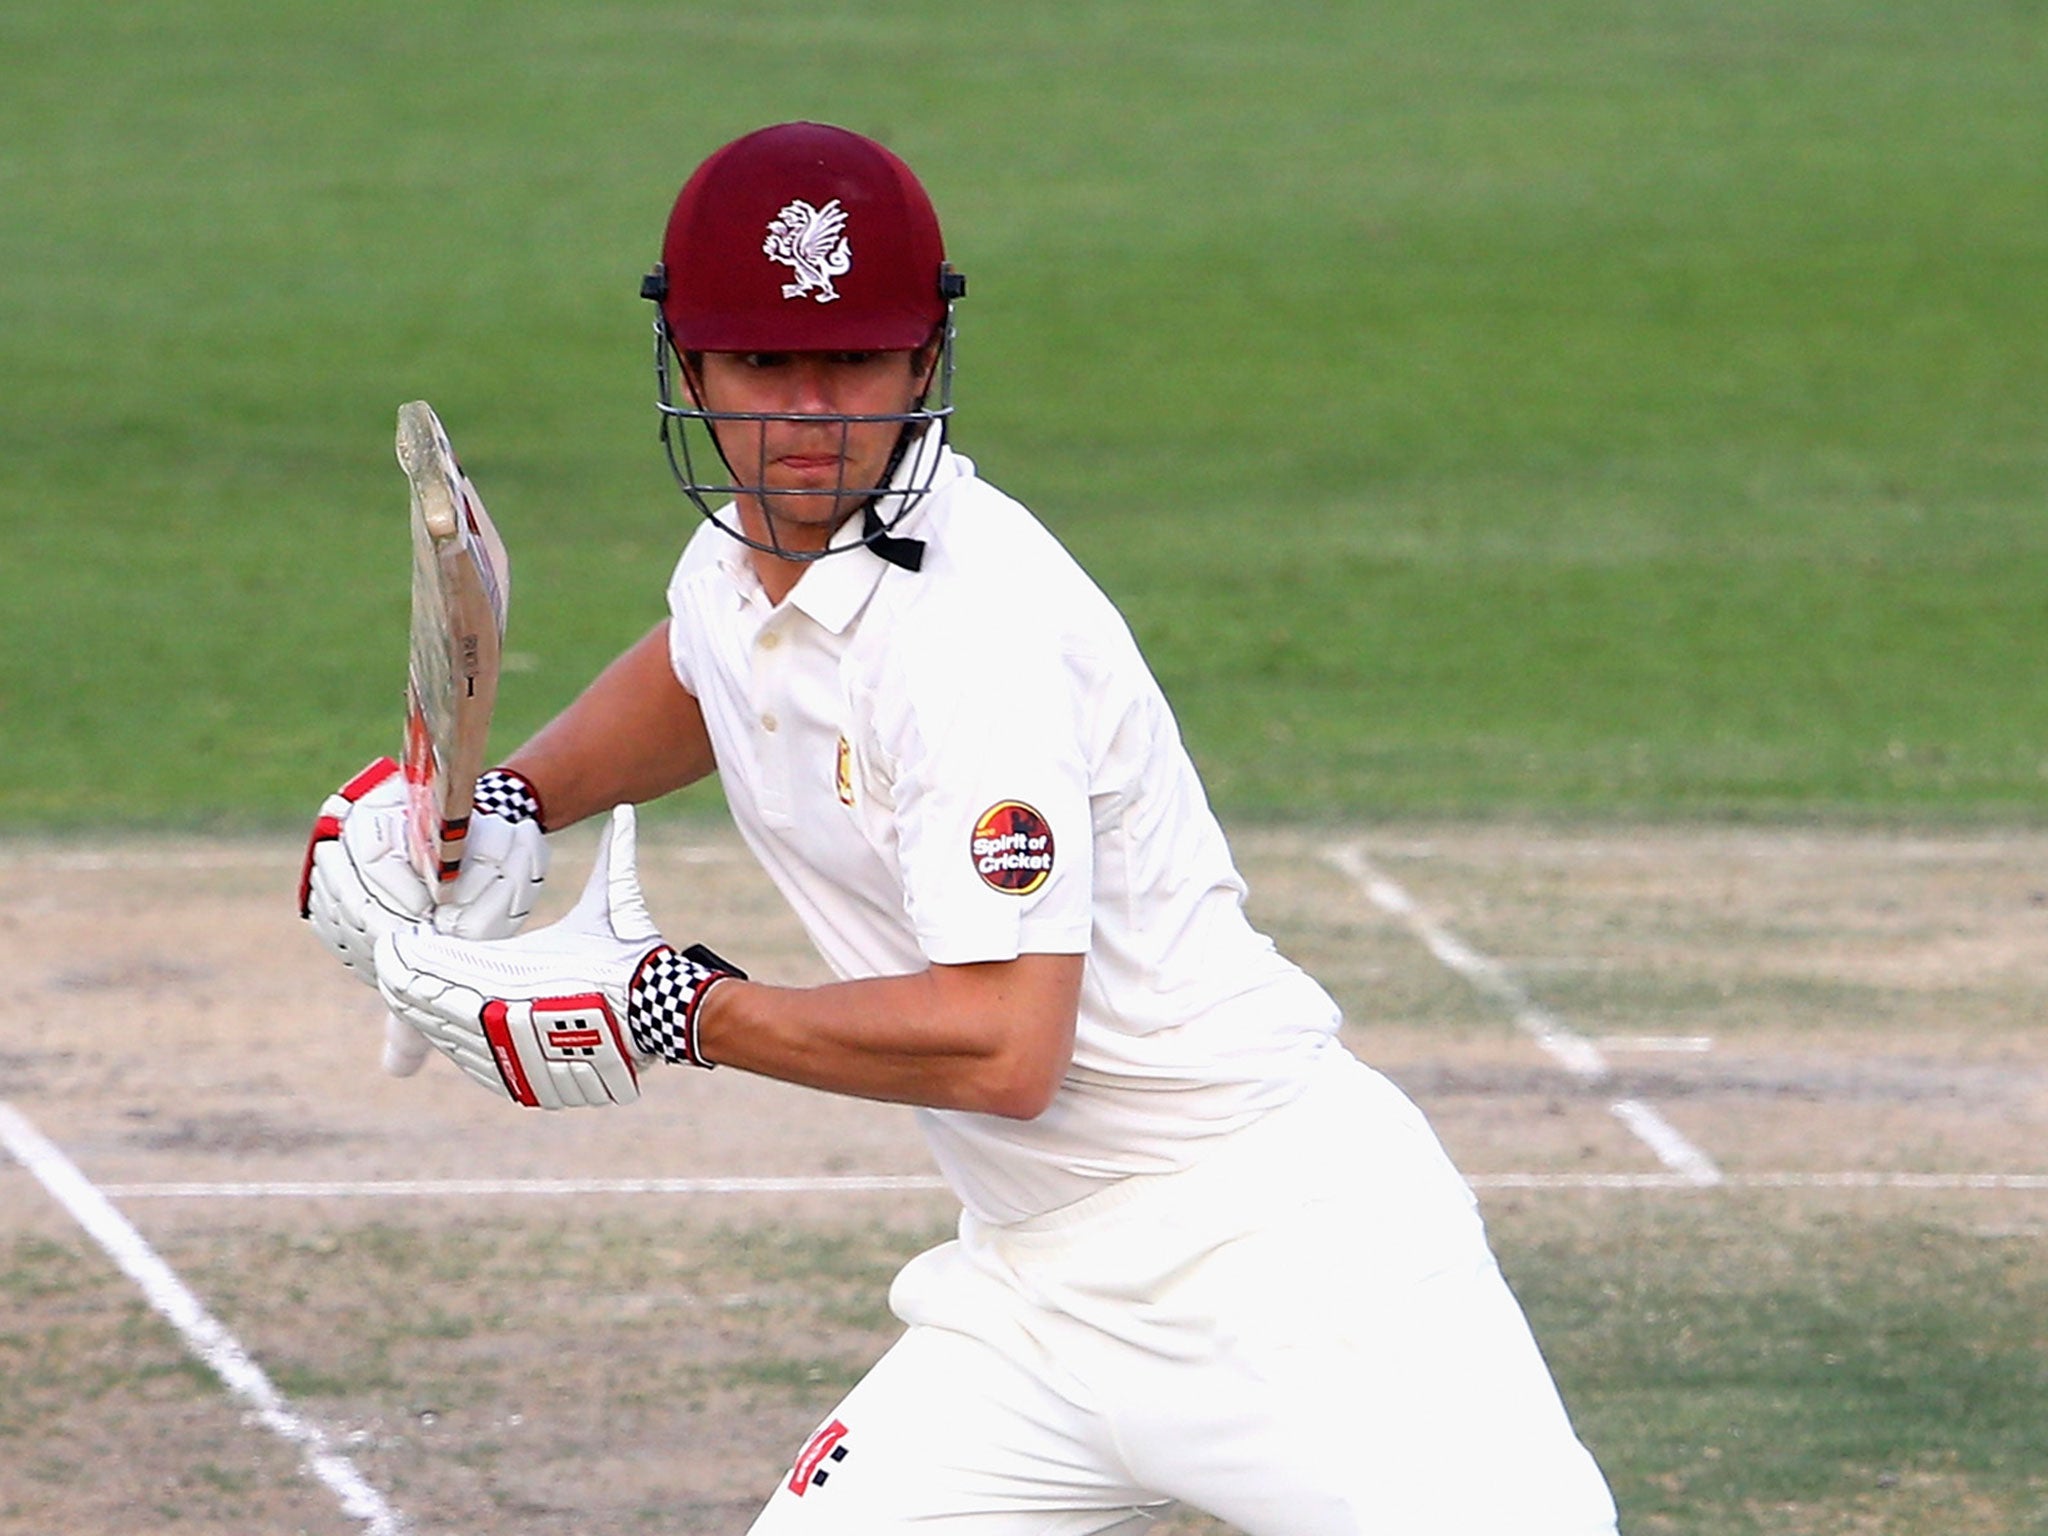 James Hildreth needs only 85 runs to pass the 1,000 mark